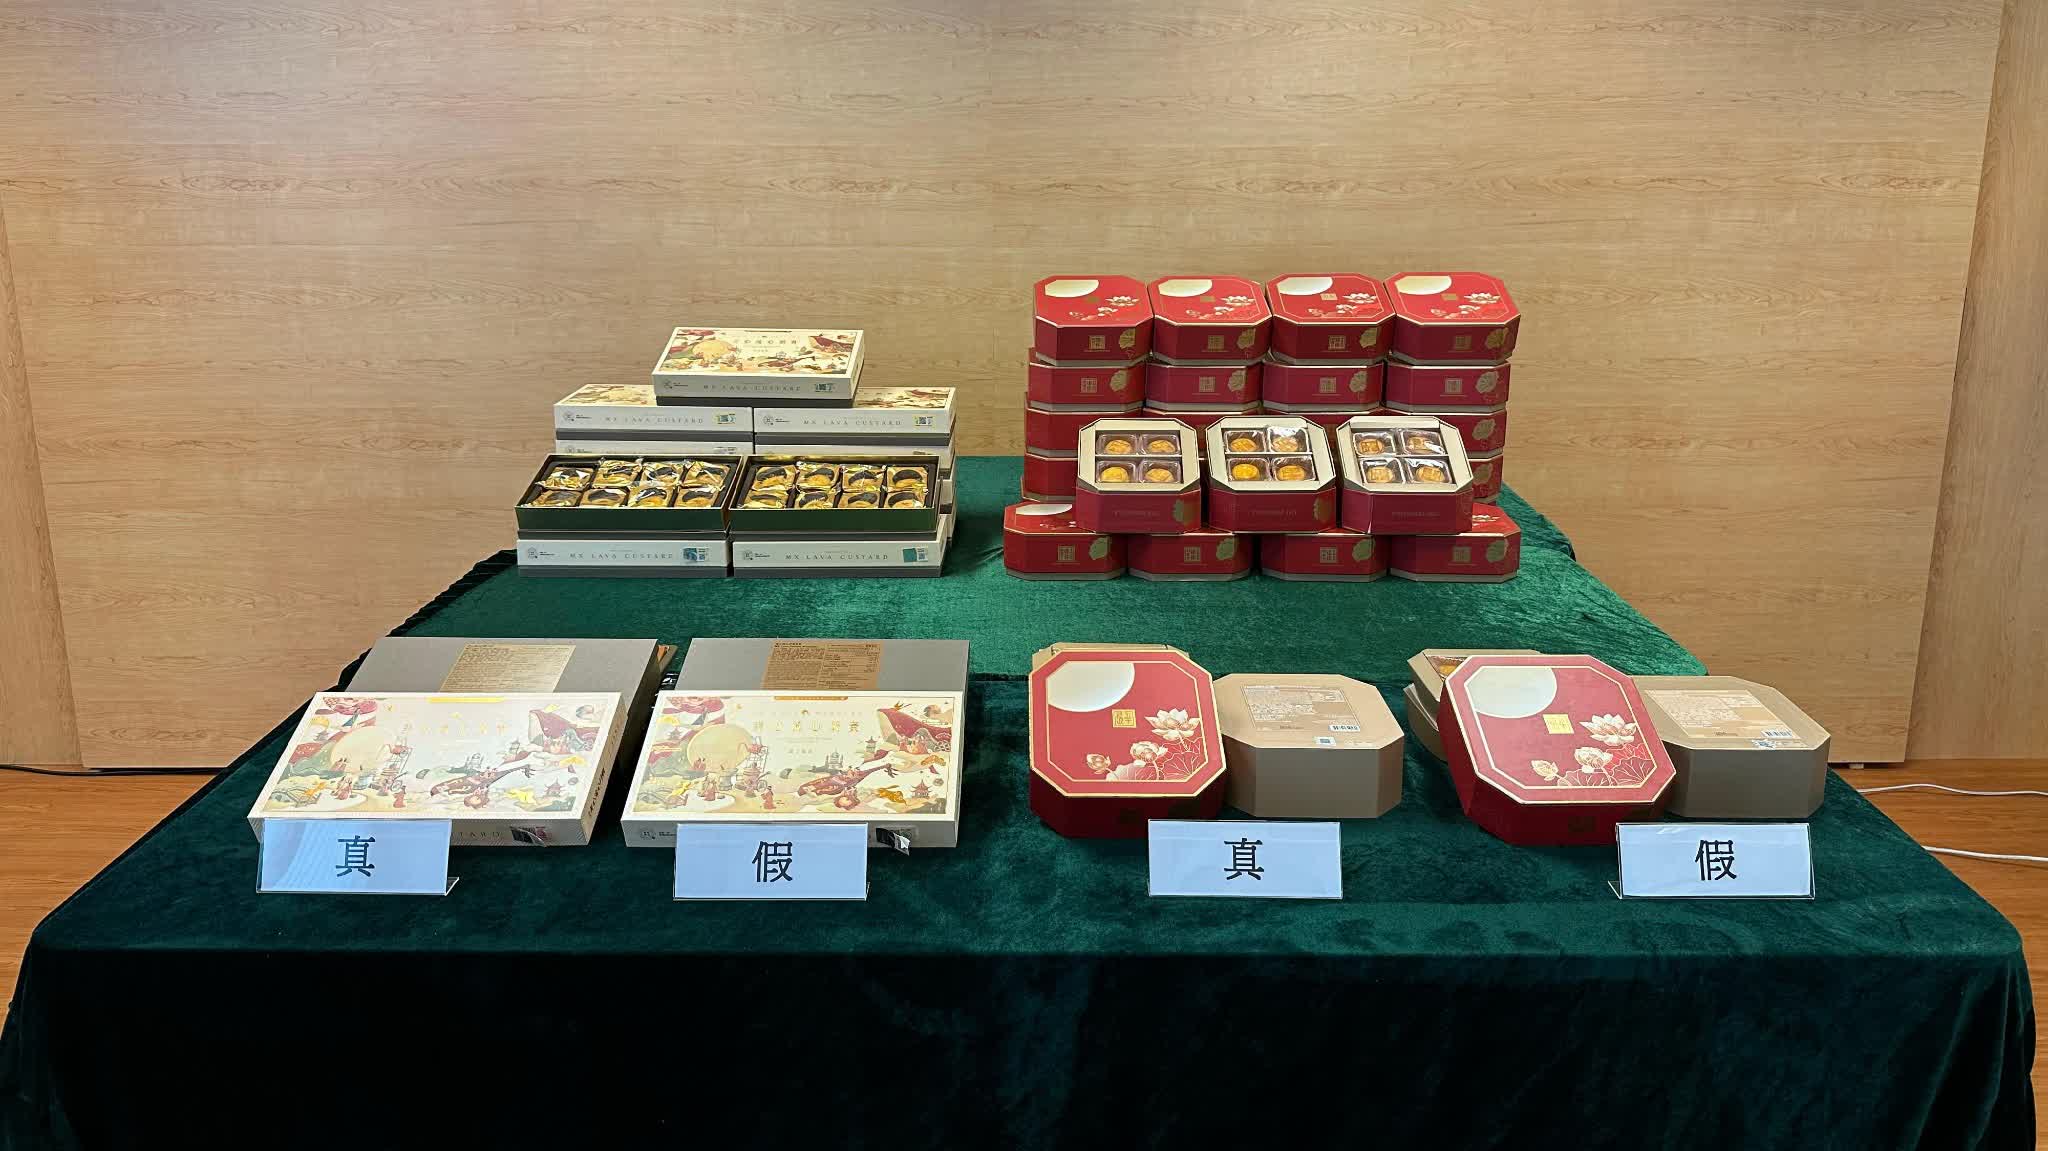 Three arrested for selling counterfeit mooncakes online, involving Peninsula Hotel and Maxim